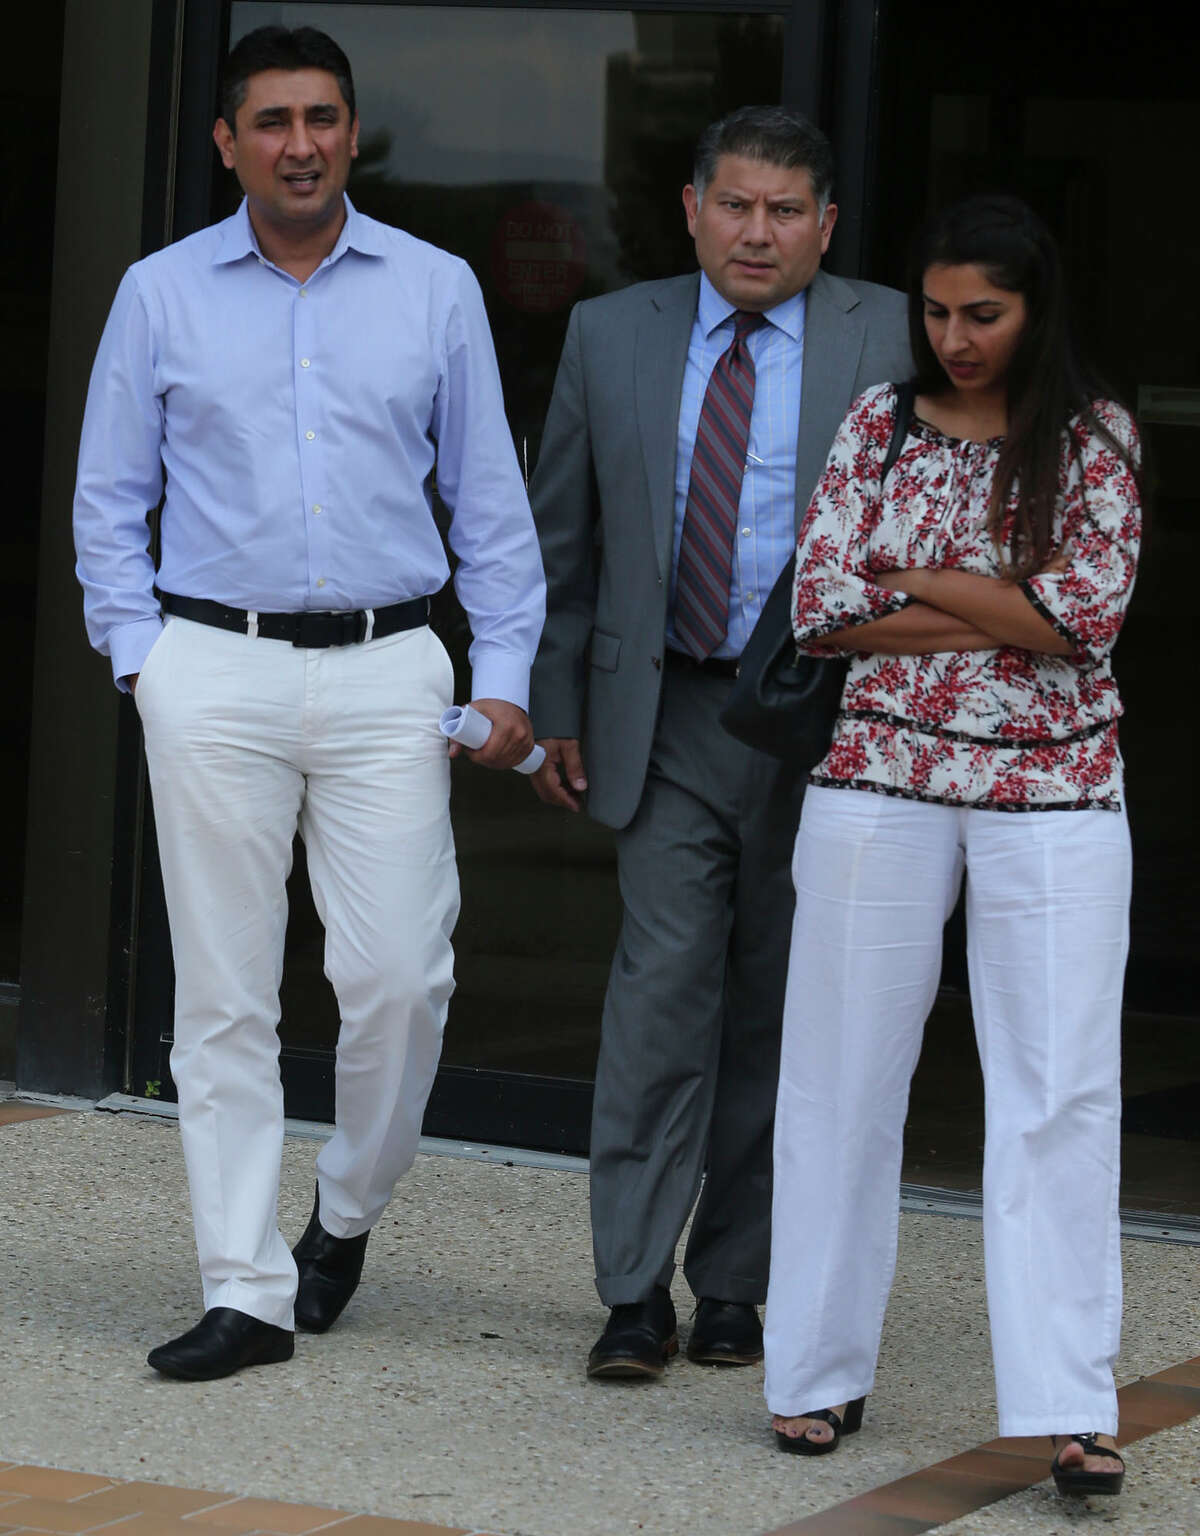 Azeez Mistry (left) leaves San Antonio’s federal courthouse. Mistry is to be sentenced Dec. 7 for bribing a fellow worker to document undocumented immigrants as citizens.